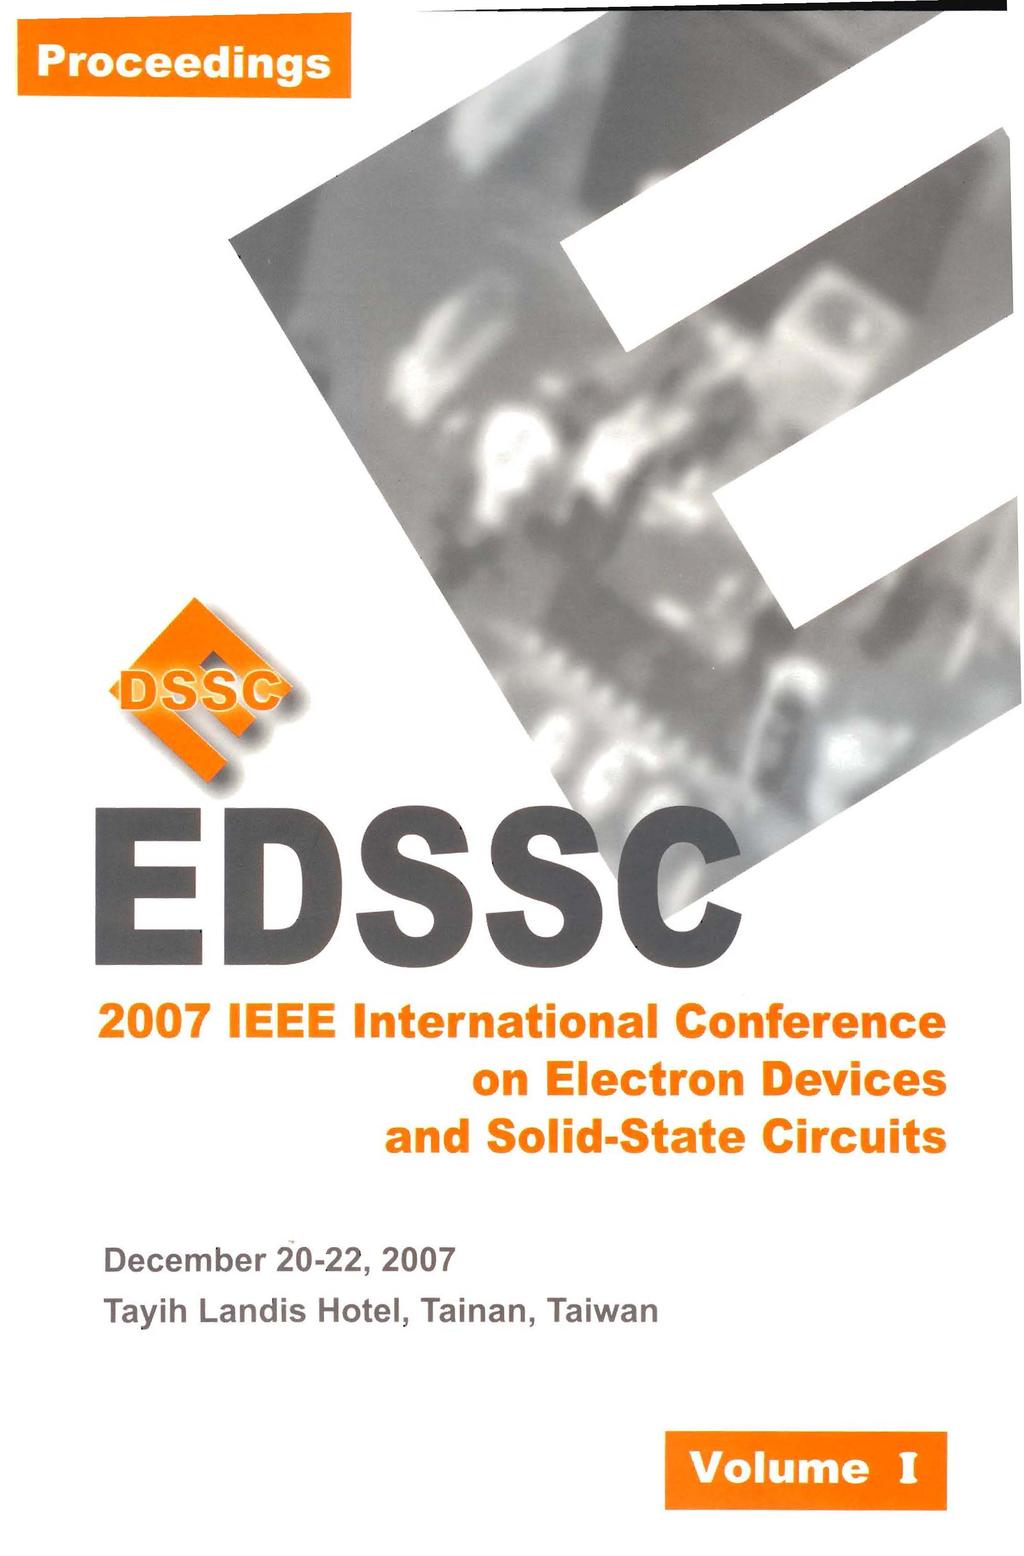 Proceedings 2007 IEEE International Conference on Electron Devices and